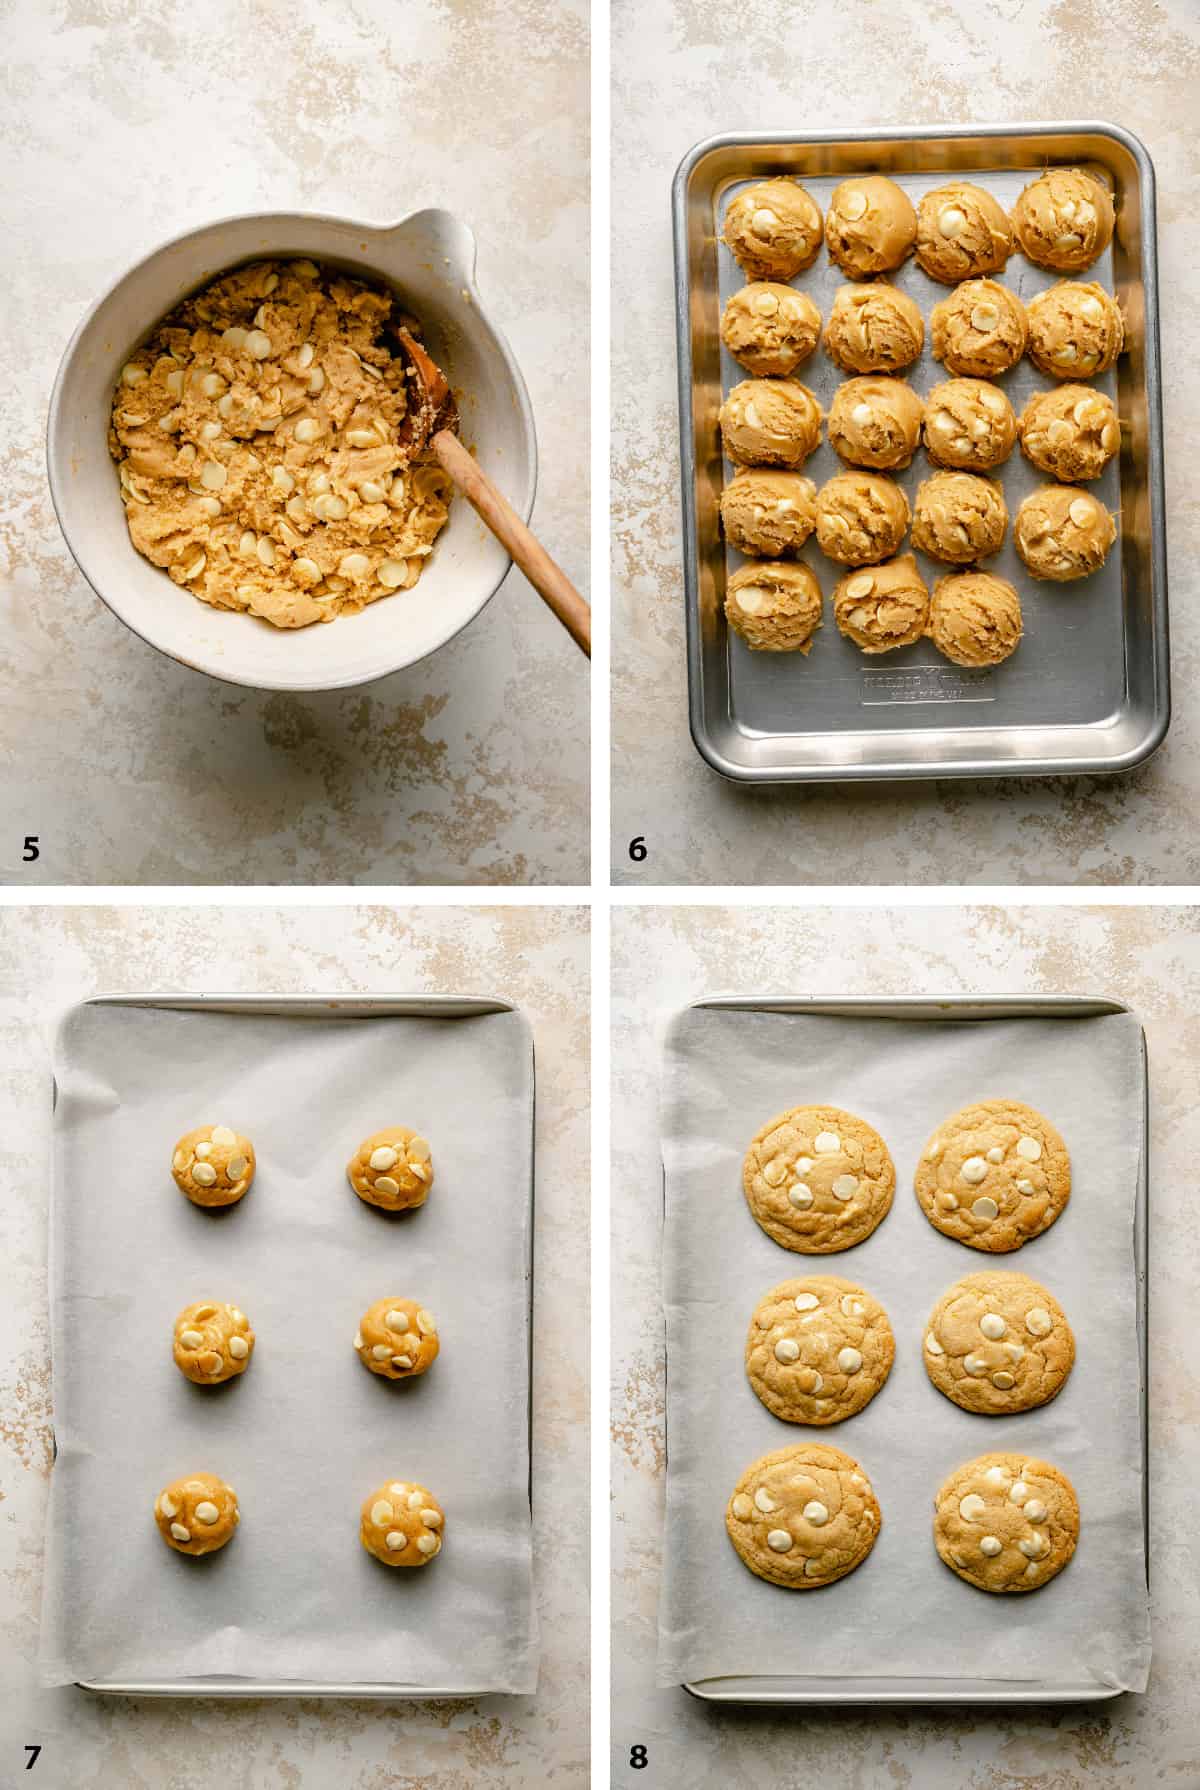 Process steps of cookie dough with chocolate chips, scooped and baked on baking sheet.